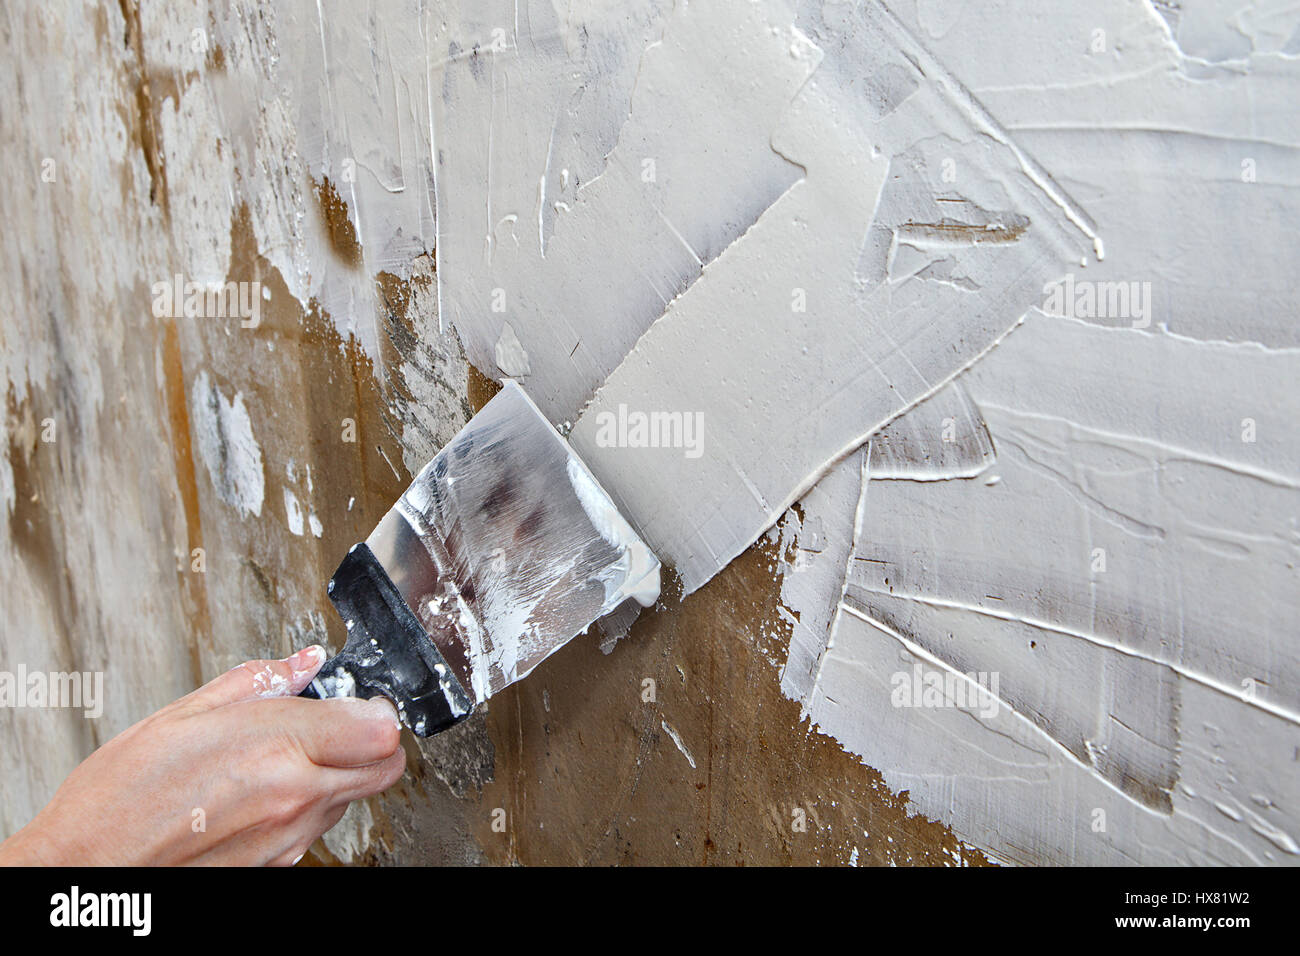 Align the wall with a painting ground coat, painter hands holding spatula, close-up. Stock Photo